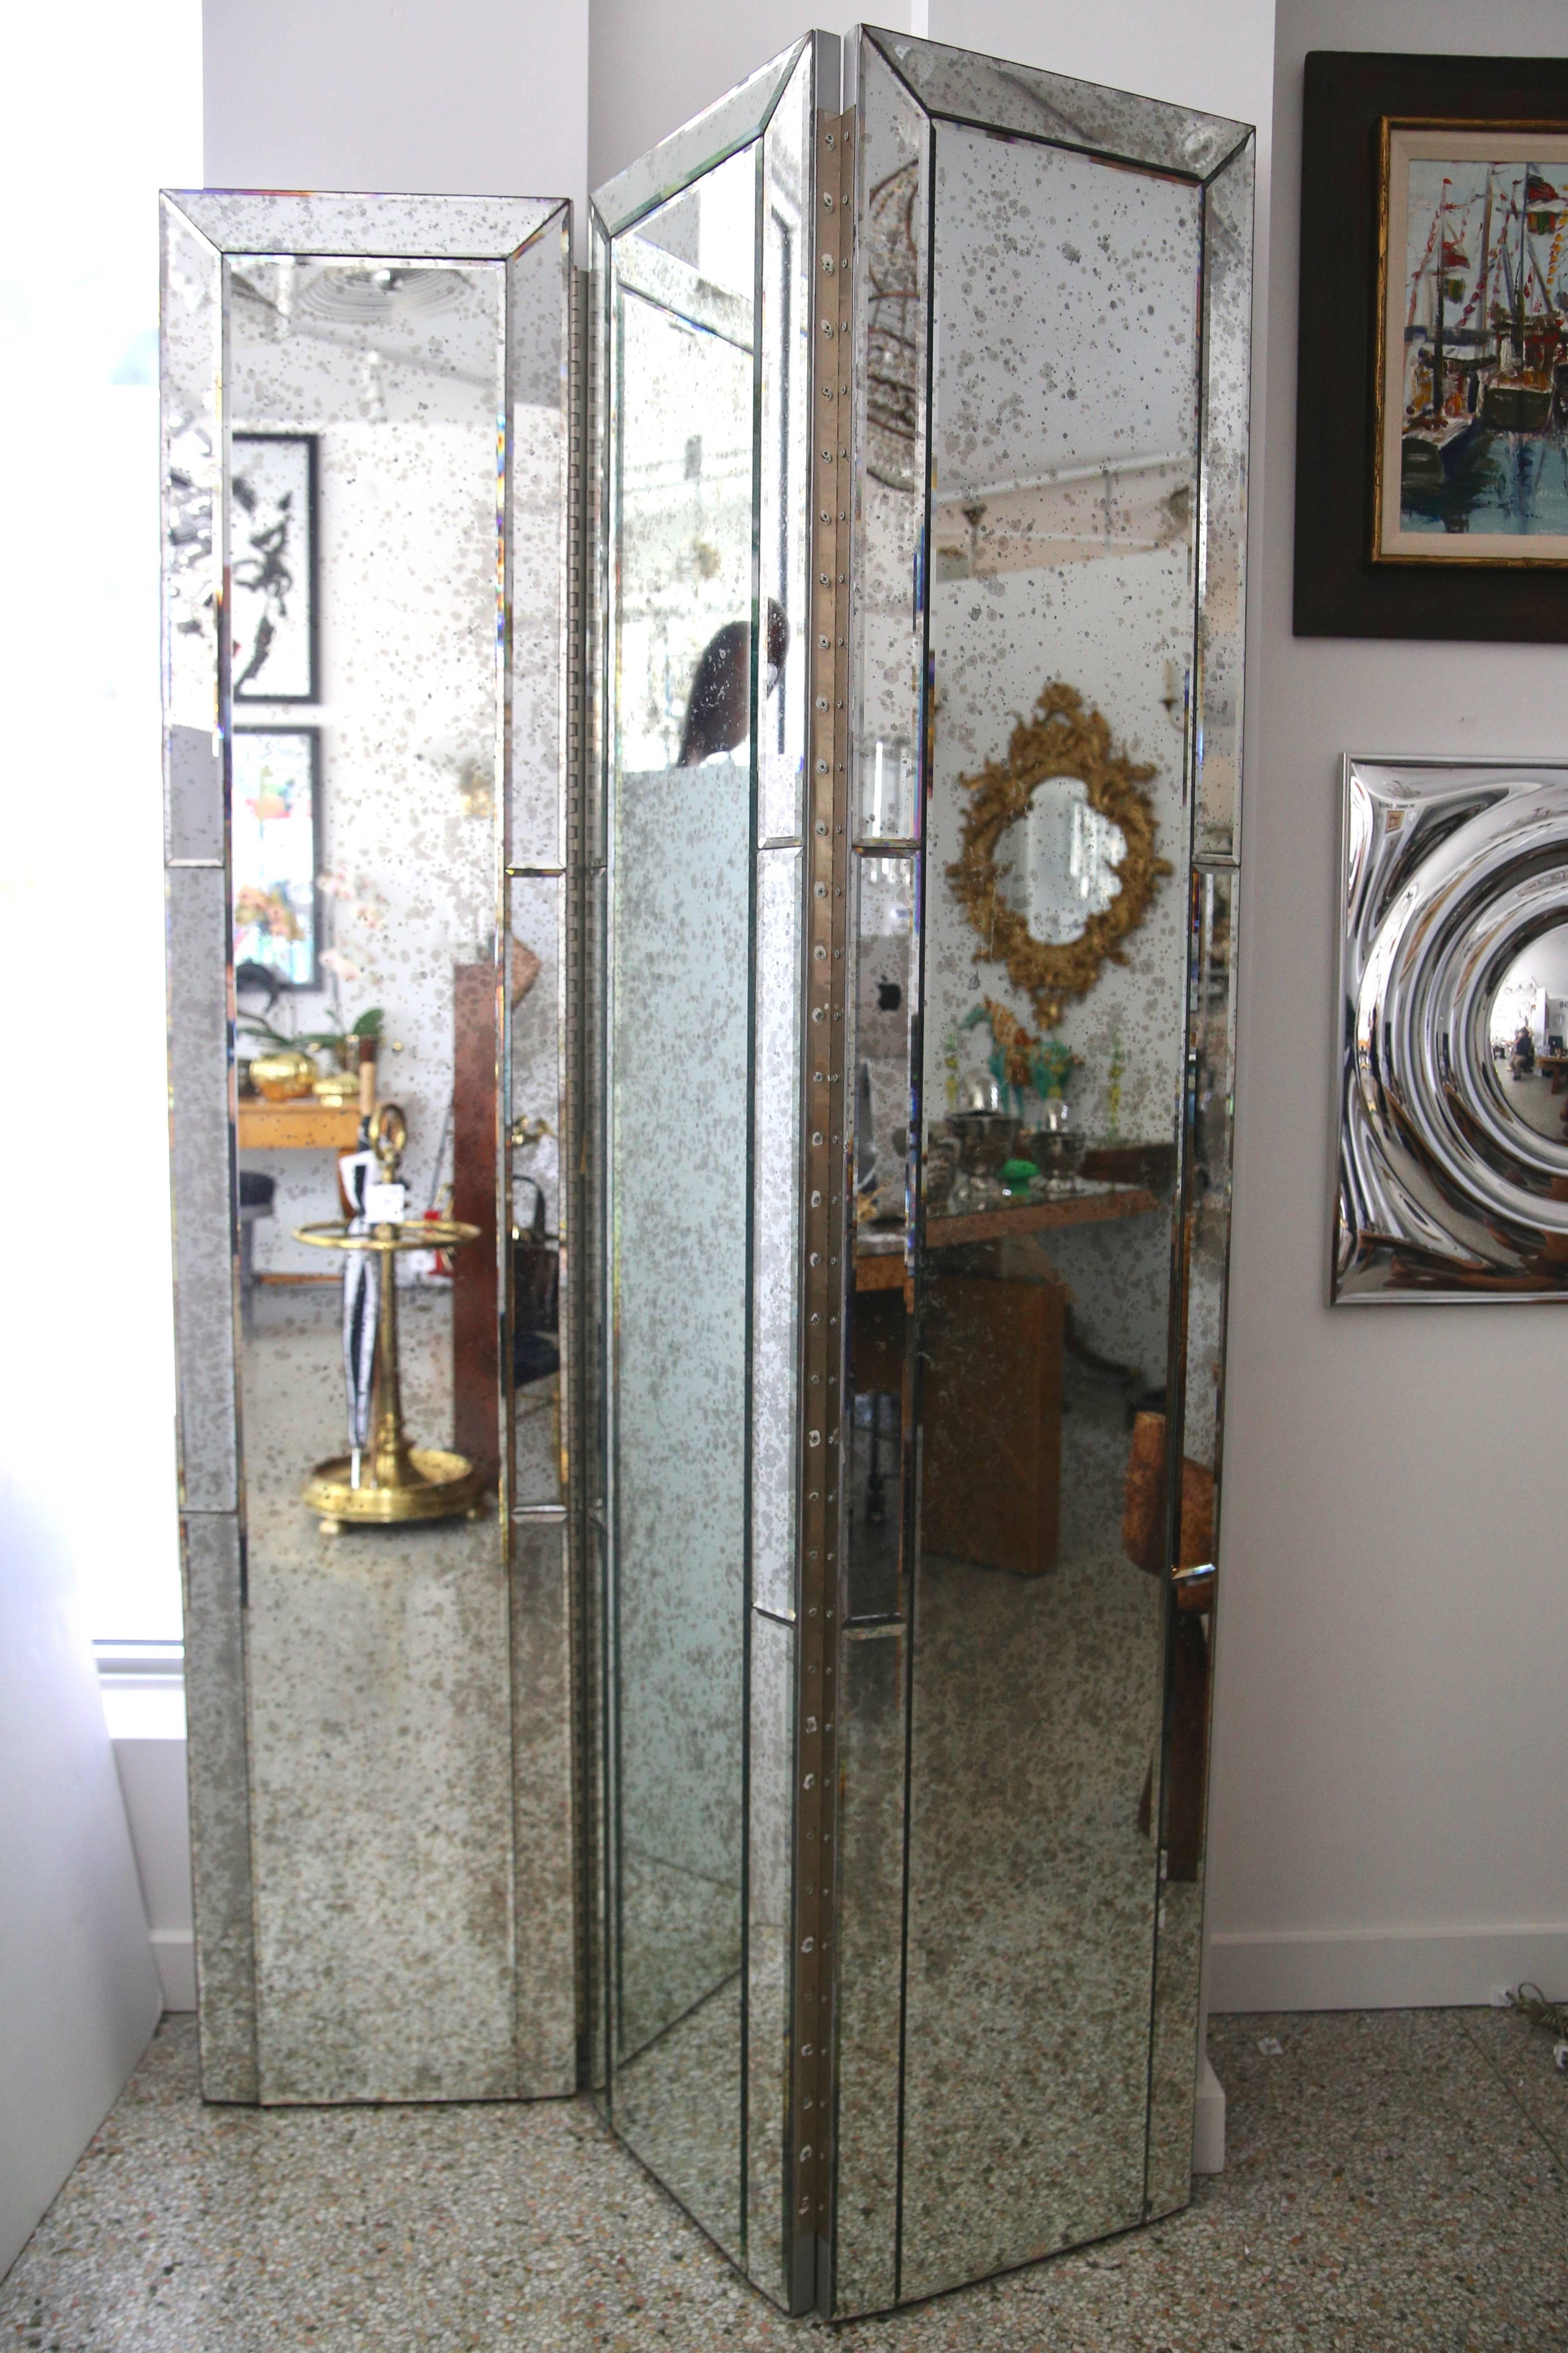 This stylish three-panel mirror will make the perfect divider or backdrop for your home with its antiqued mirror panels all detailed with a beveled edge.

Note:  Each section measure 16